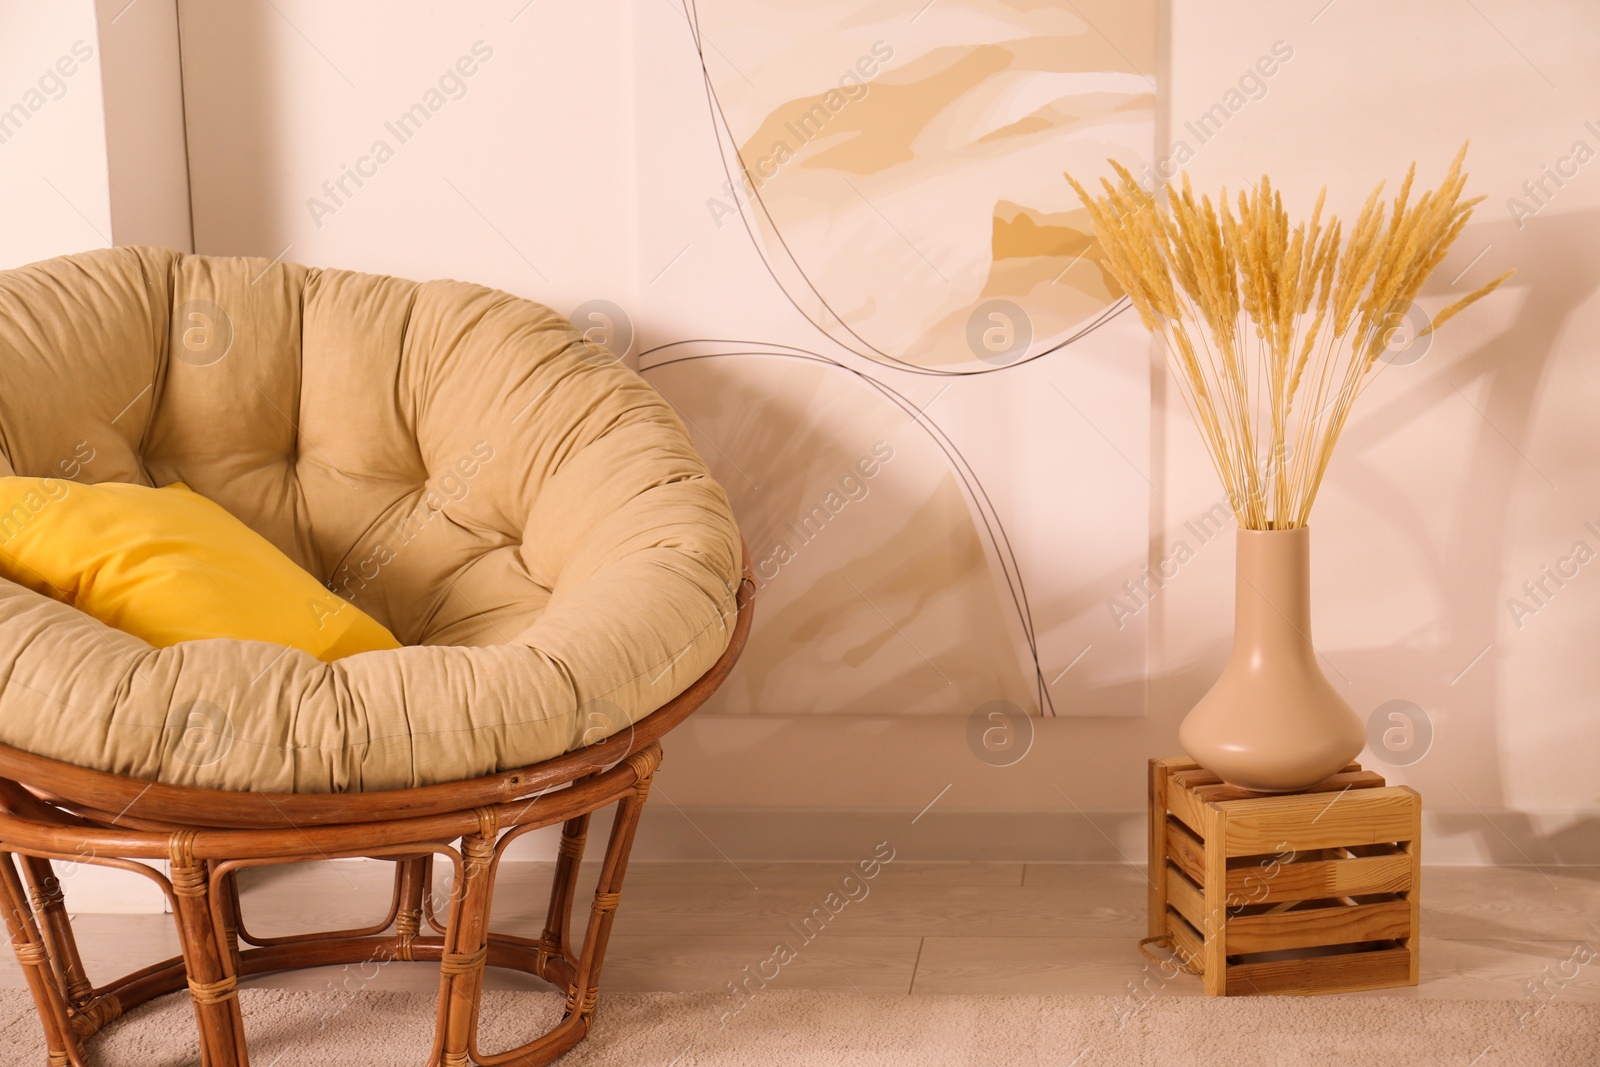 Photo of Vase with decorative dried plants and painting near papasan chair in stylish room interior